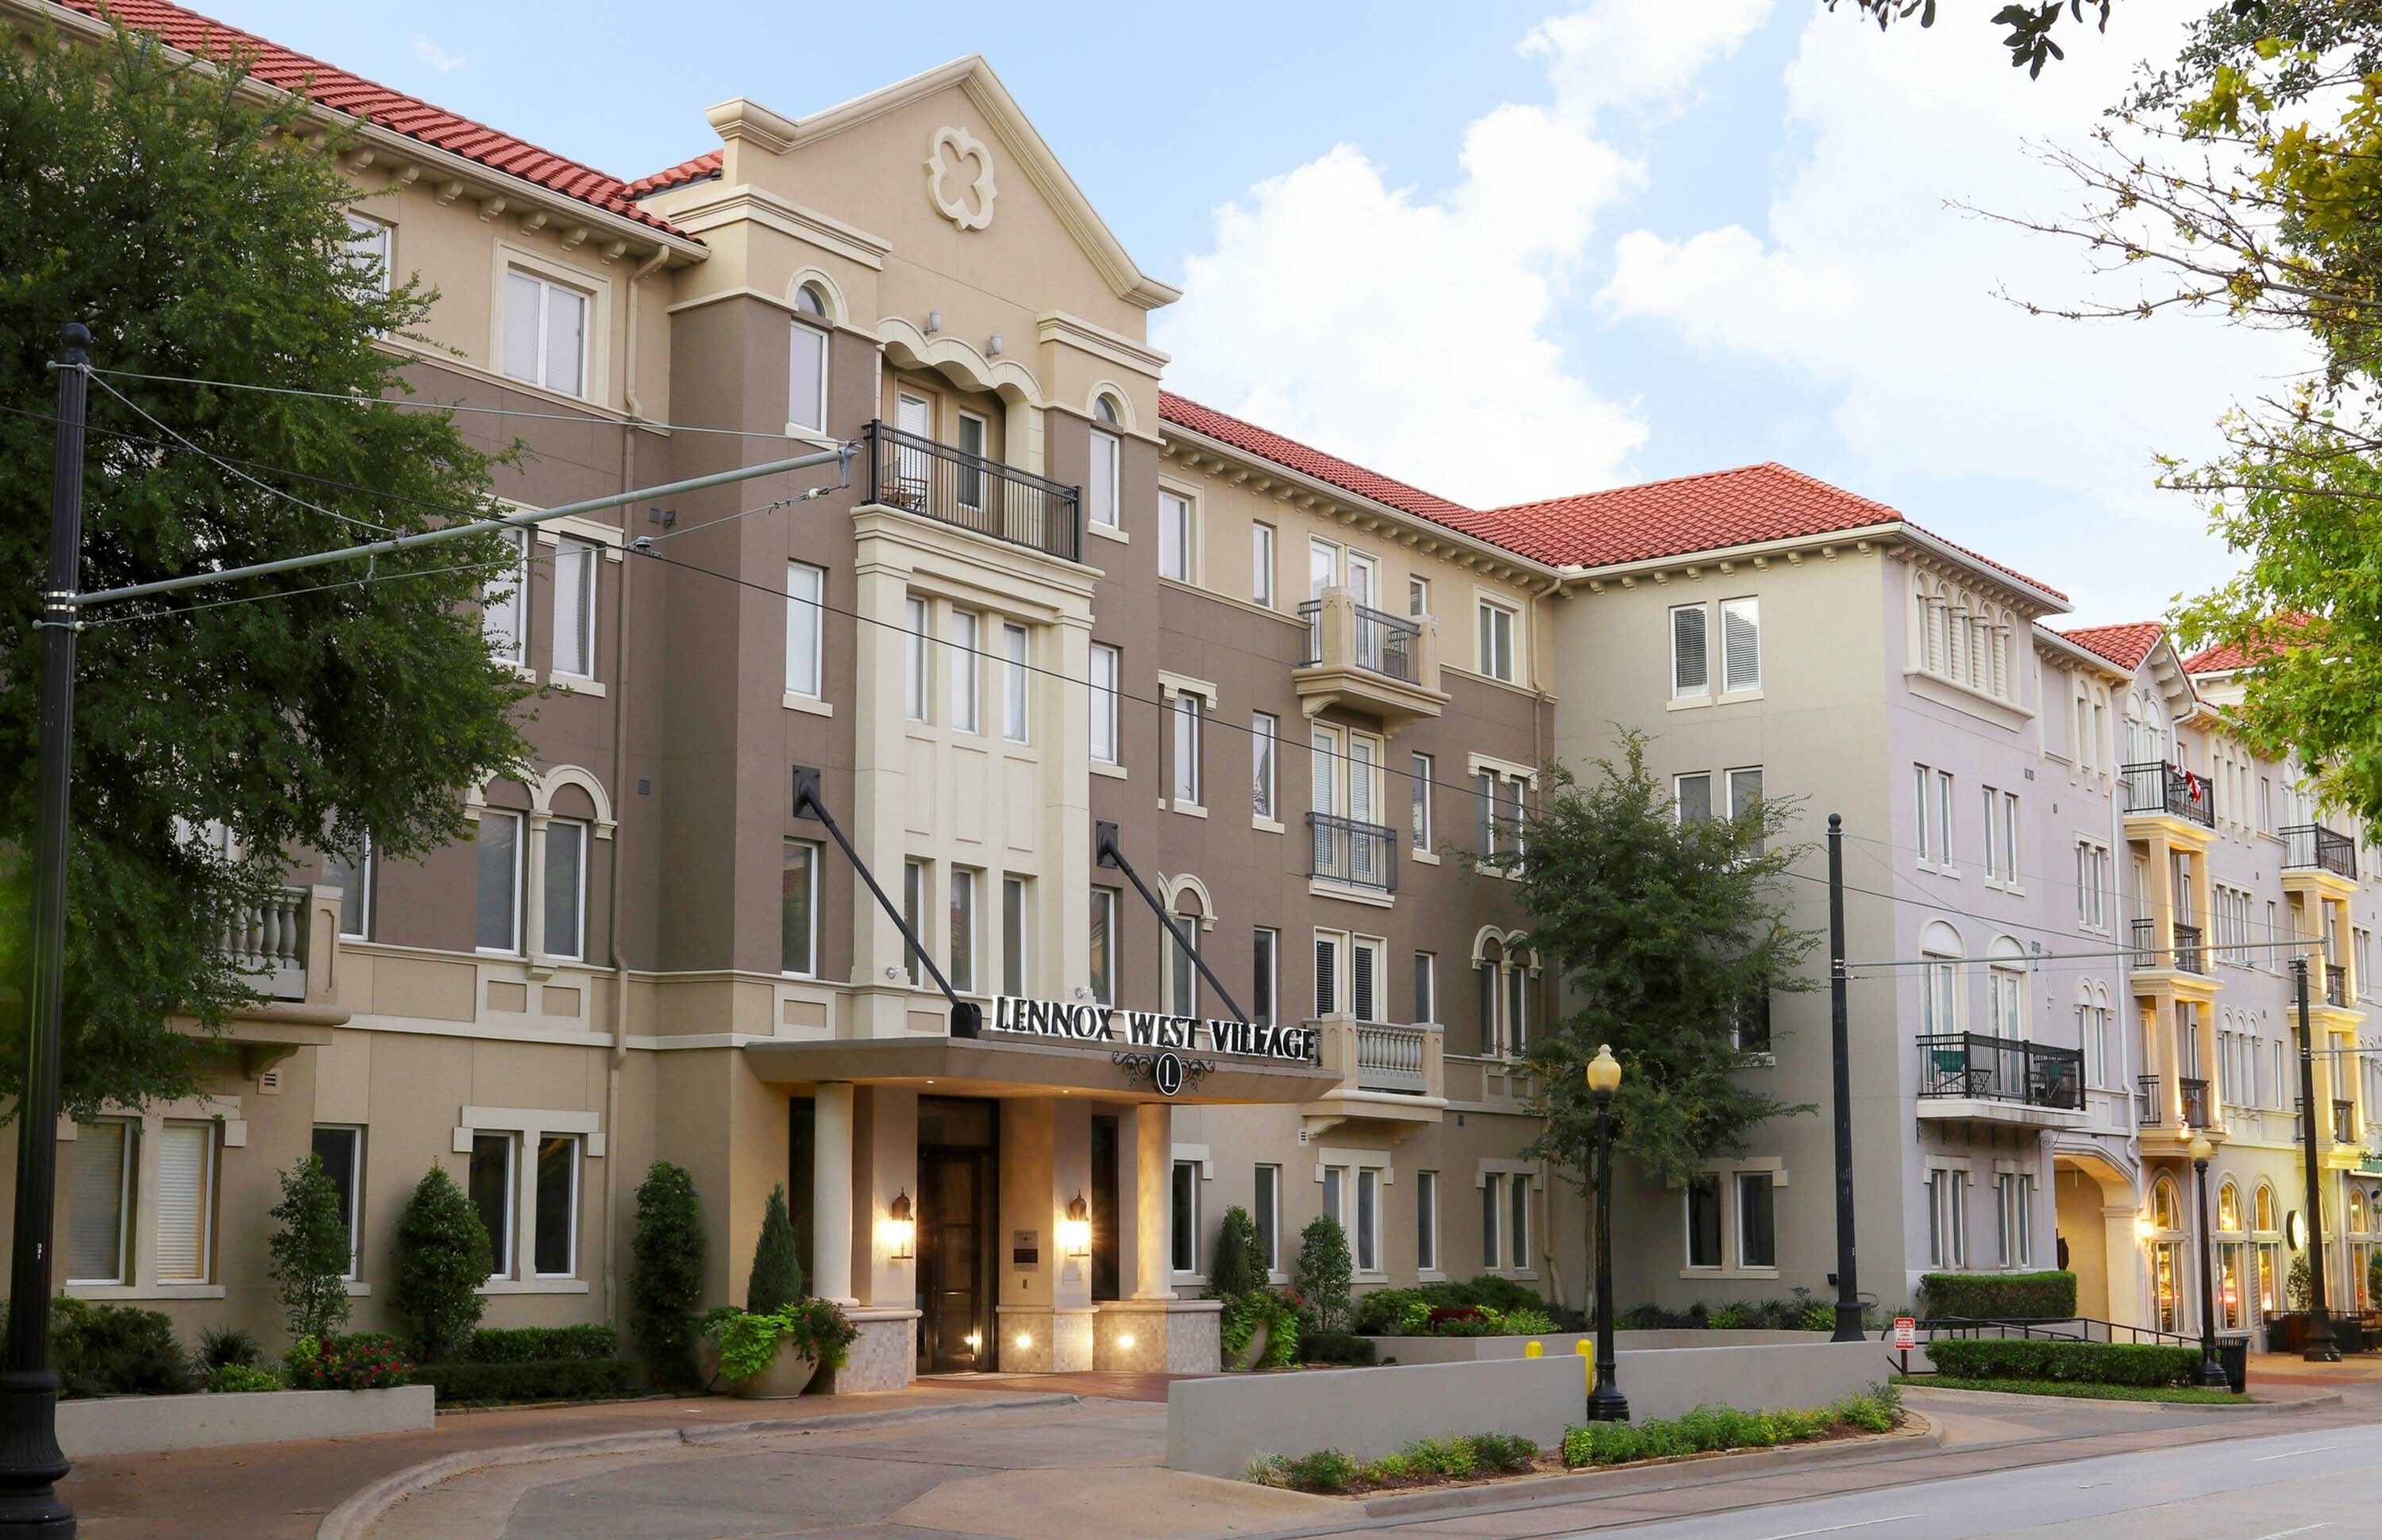 CIM Group Completes Disposition of 159-Unit Lennox at West Village Apartment Community in Dallas’ Uptown West Village Neighborhood